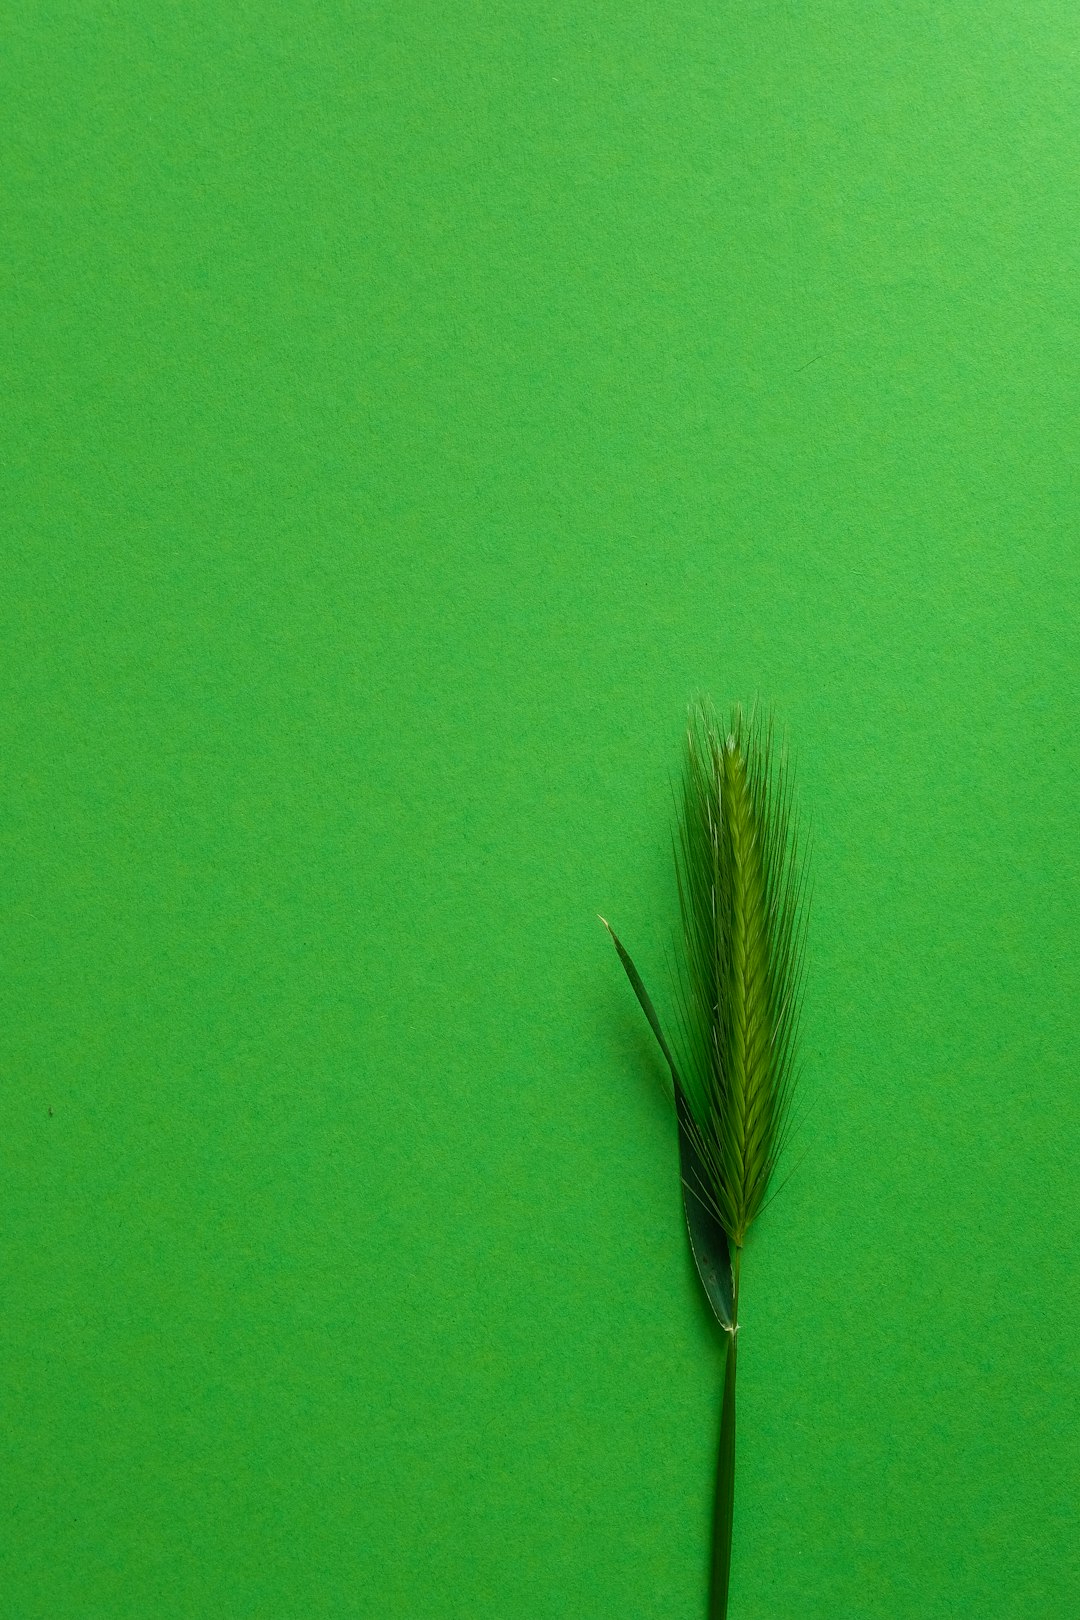 green and brown feather on green textile